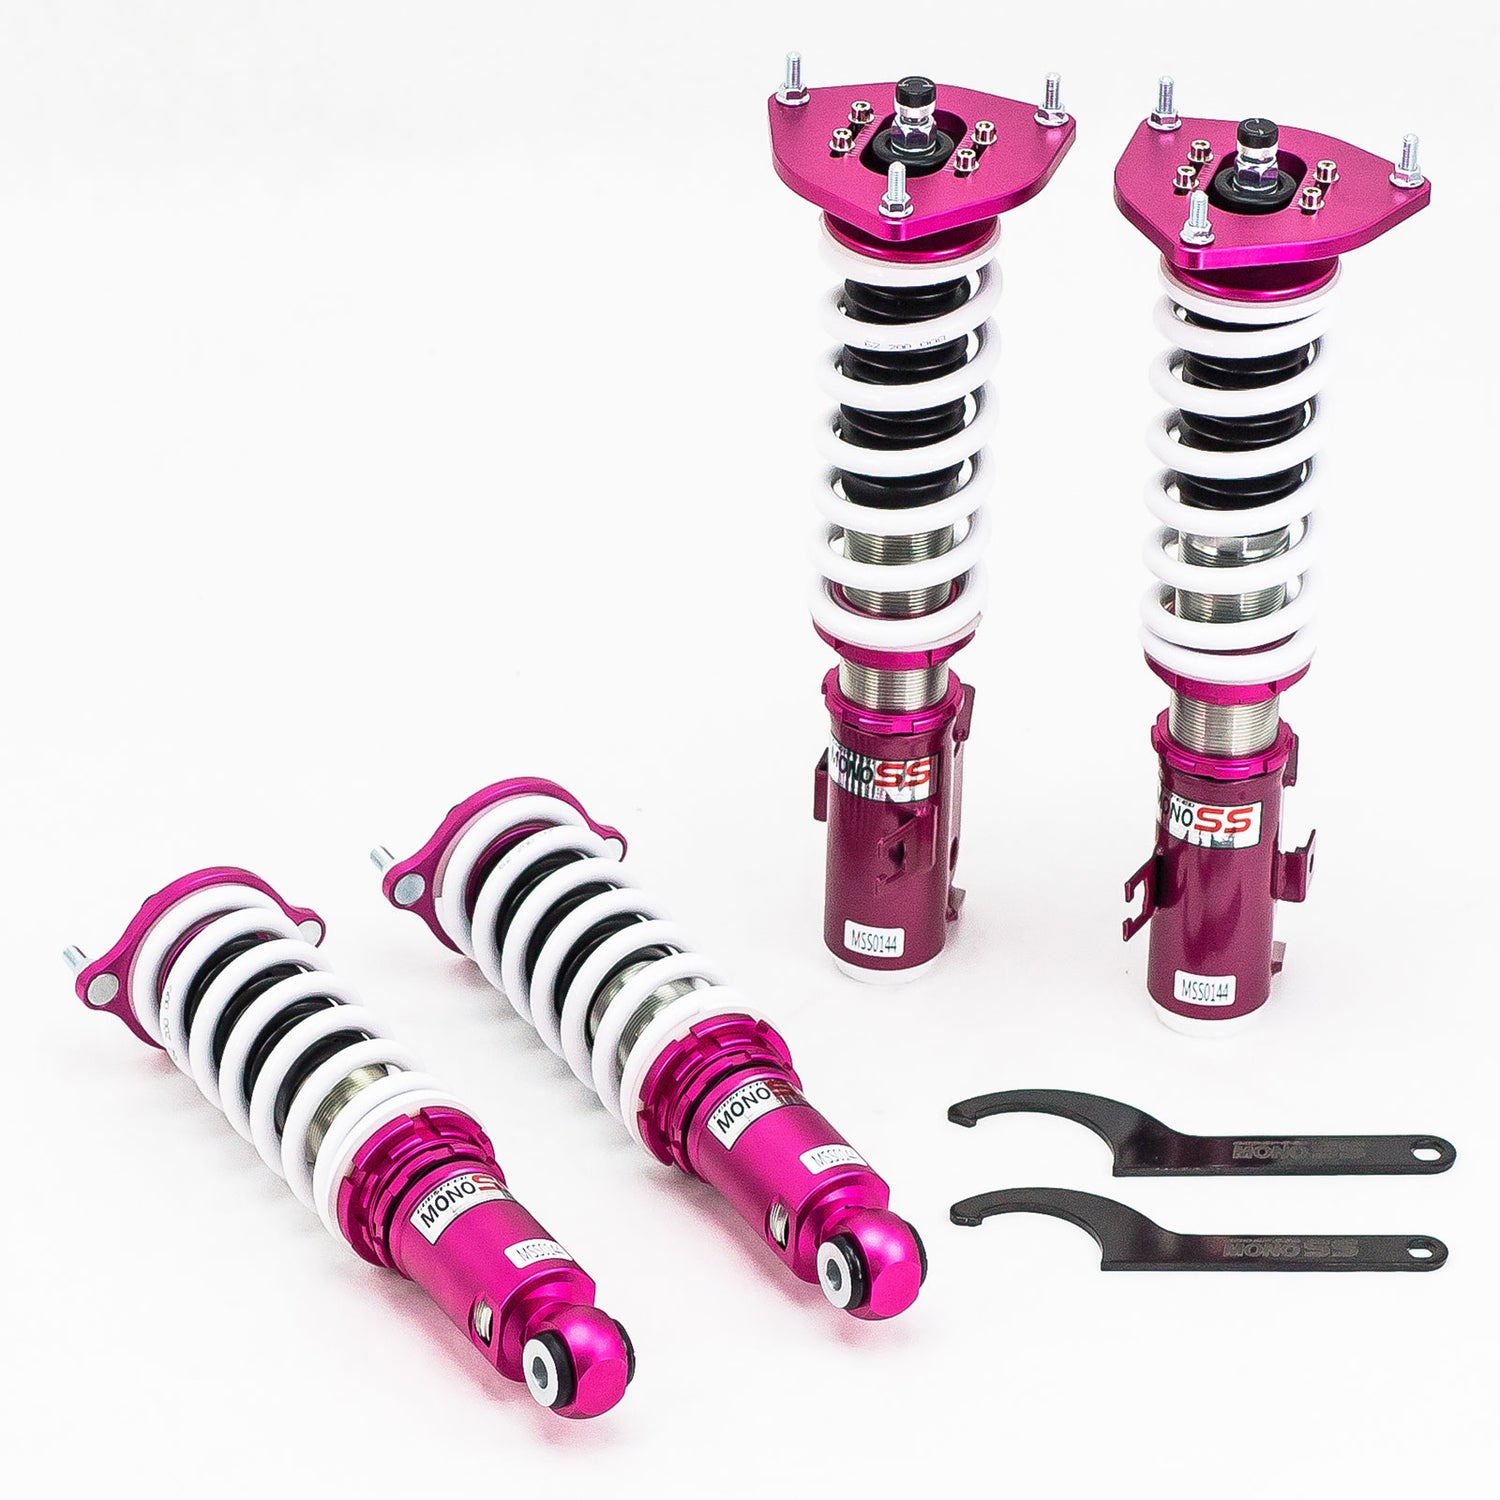 Godspeed MSS0144 MonoSS Coilover Lowering Kit, Fully Adjustable, Ride Height, Spring Tension And 16 Click Damping, Subaru Legacy(BE/BH) 2000-04